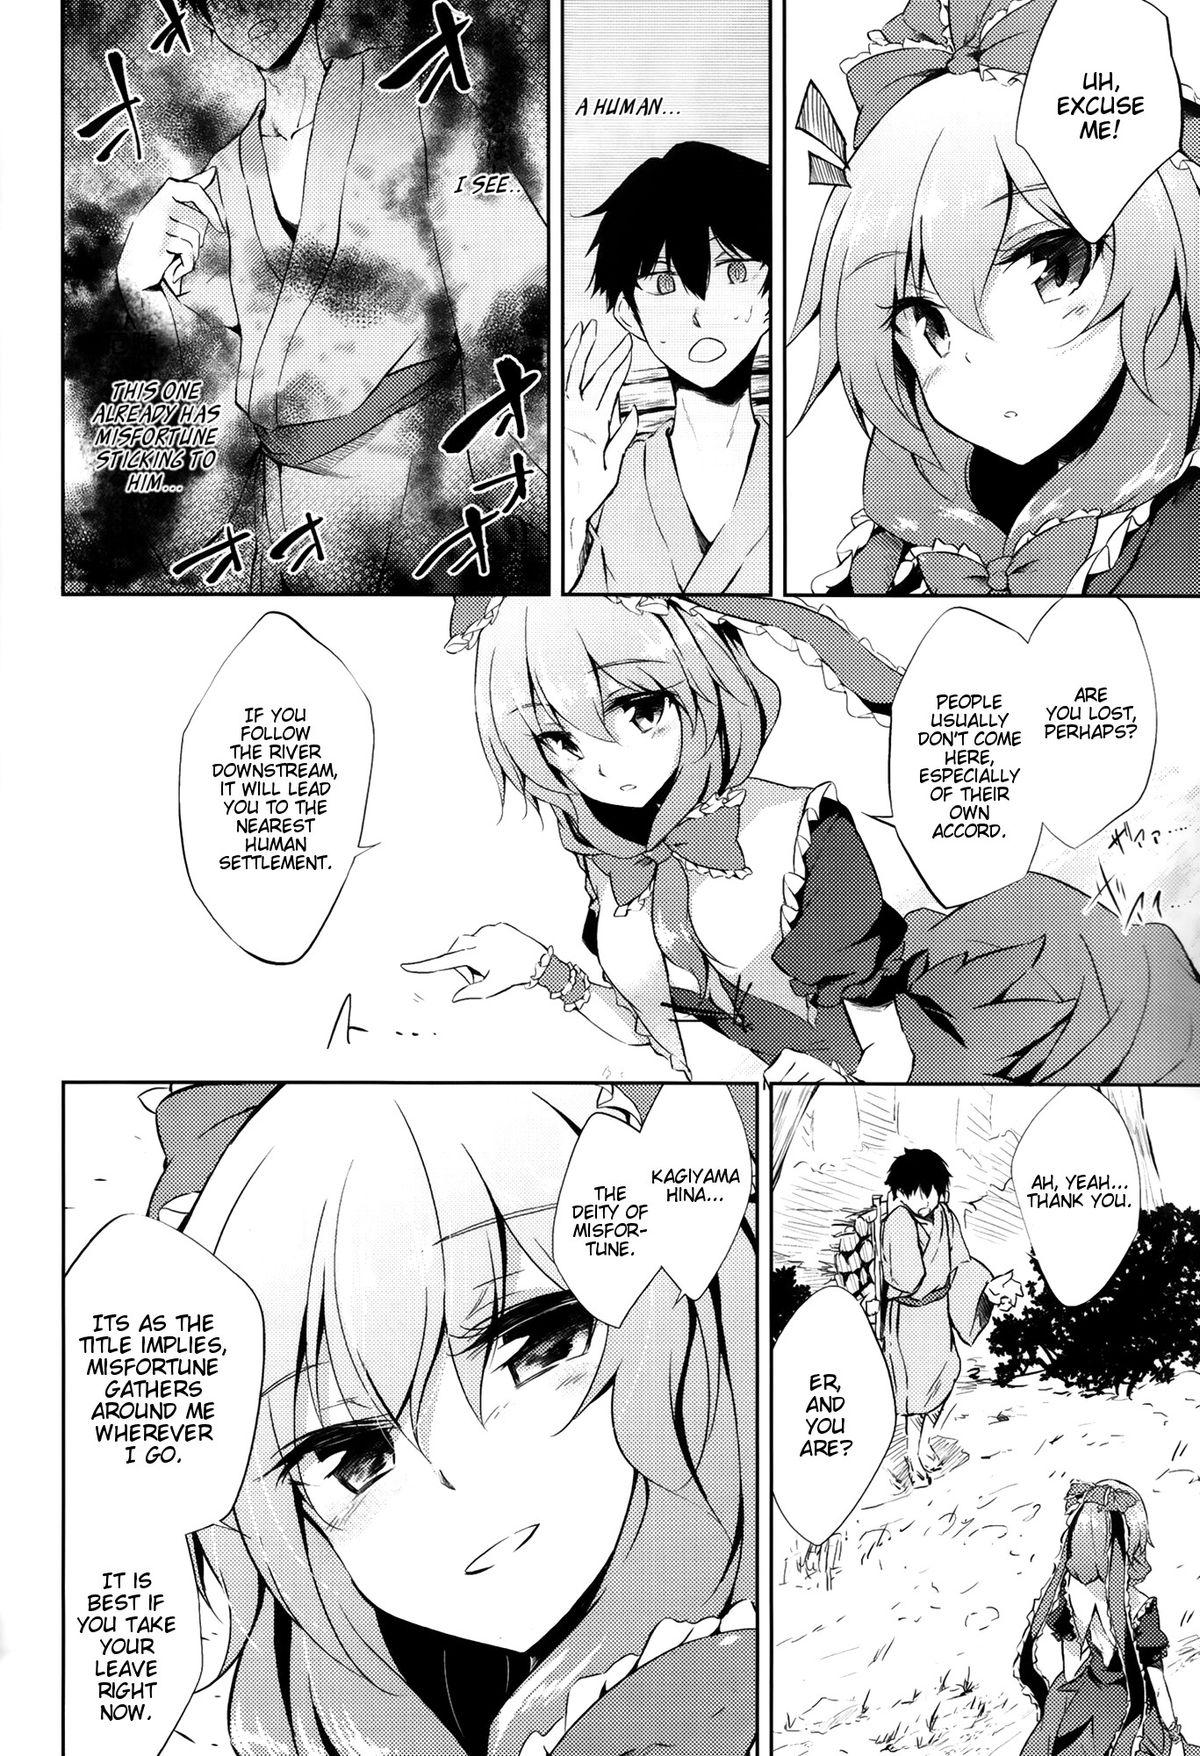 Fetish *Chuui* Horeru to Yakui kara | *Warning* Fall in love at your own risk - Touhou project Blow Job - Page 4